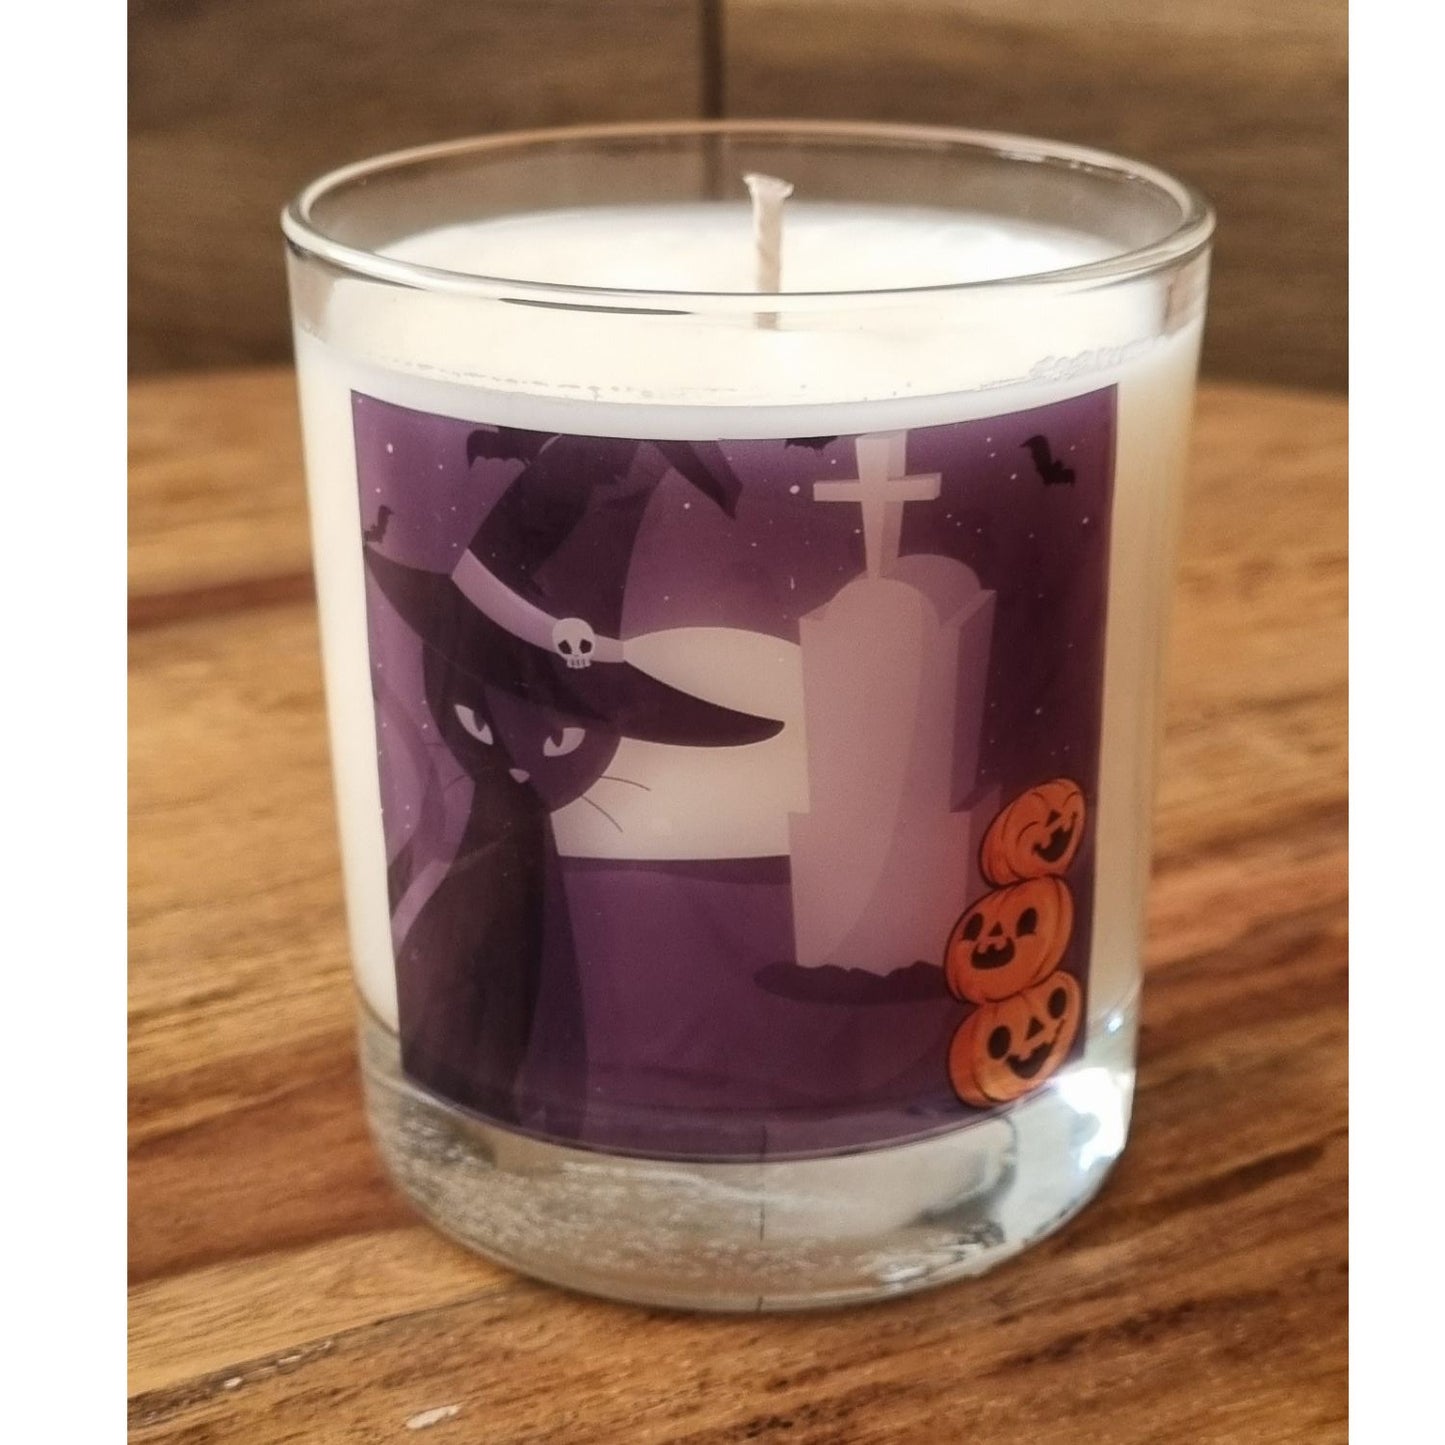 Quaver & Lyric Scented Candle in Glass Halloween Cat Design